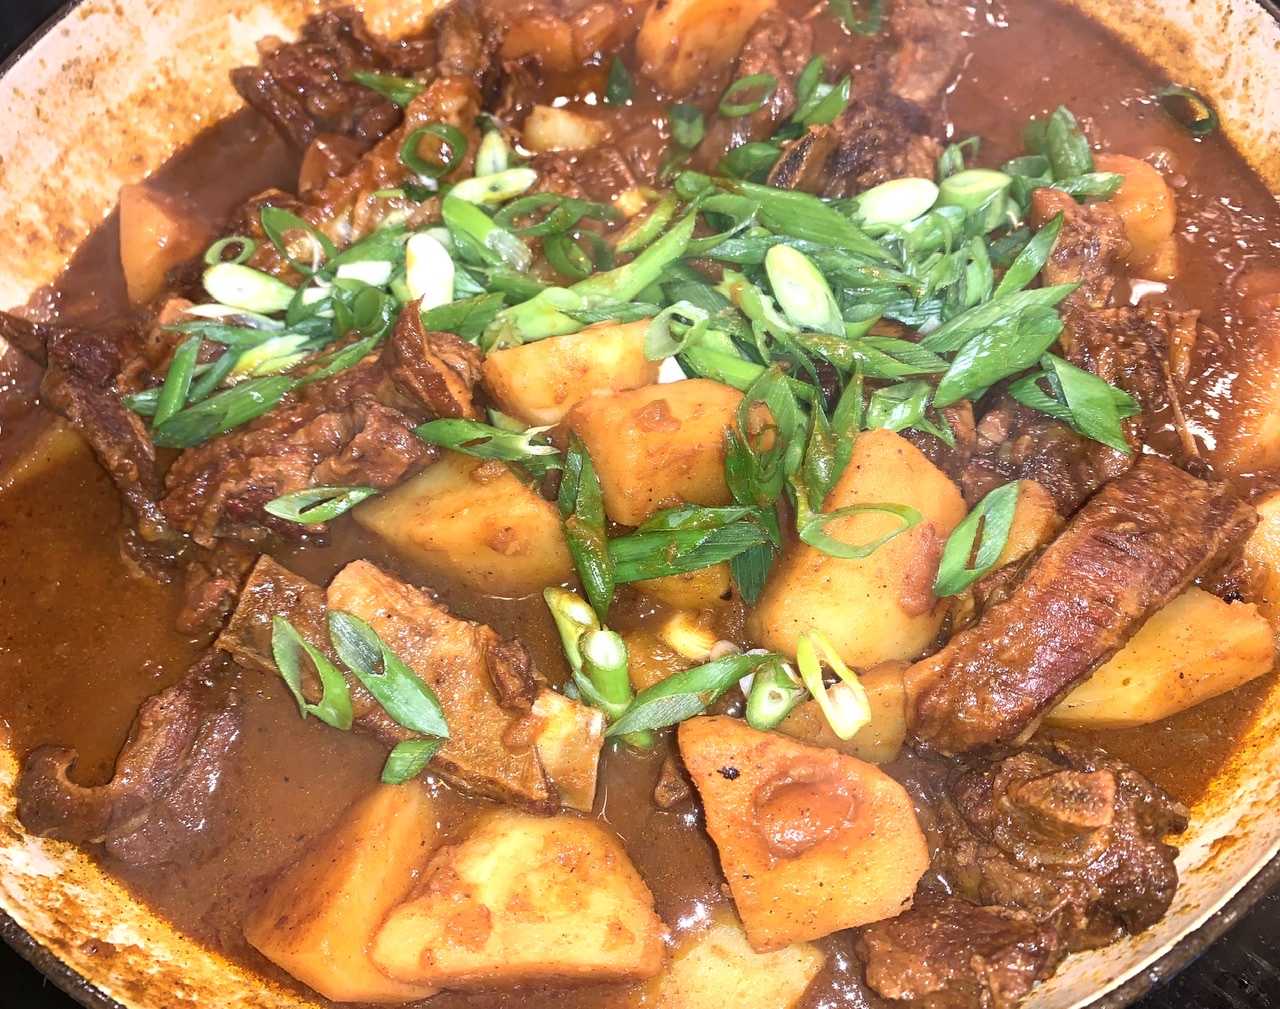 Jacques Pepin’s Amazing Spicy Lamb Curry with Apples and Potatoes